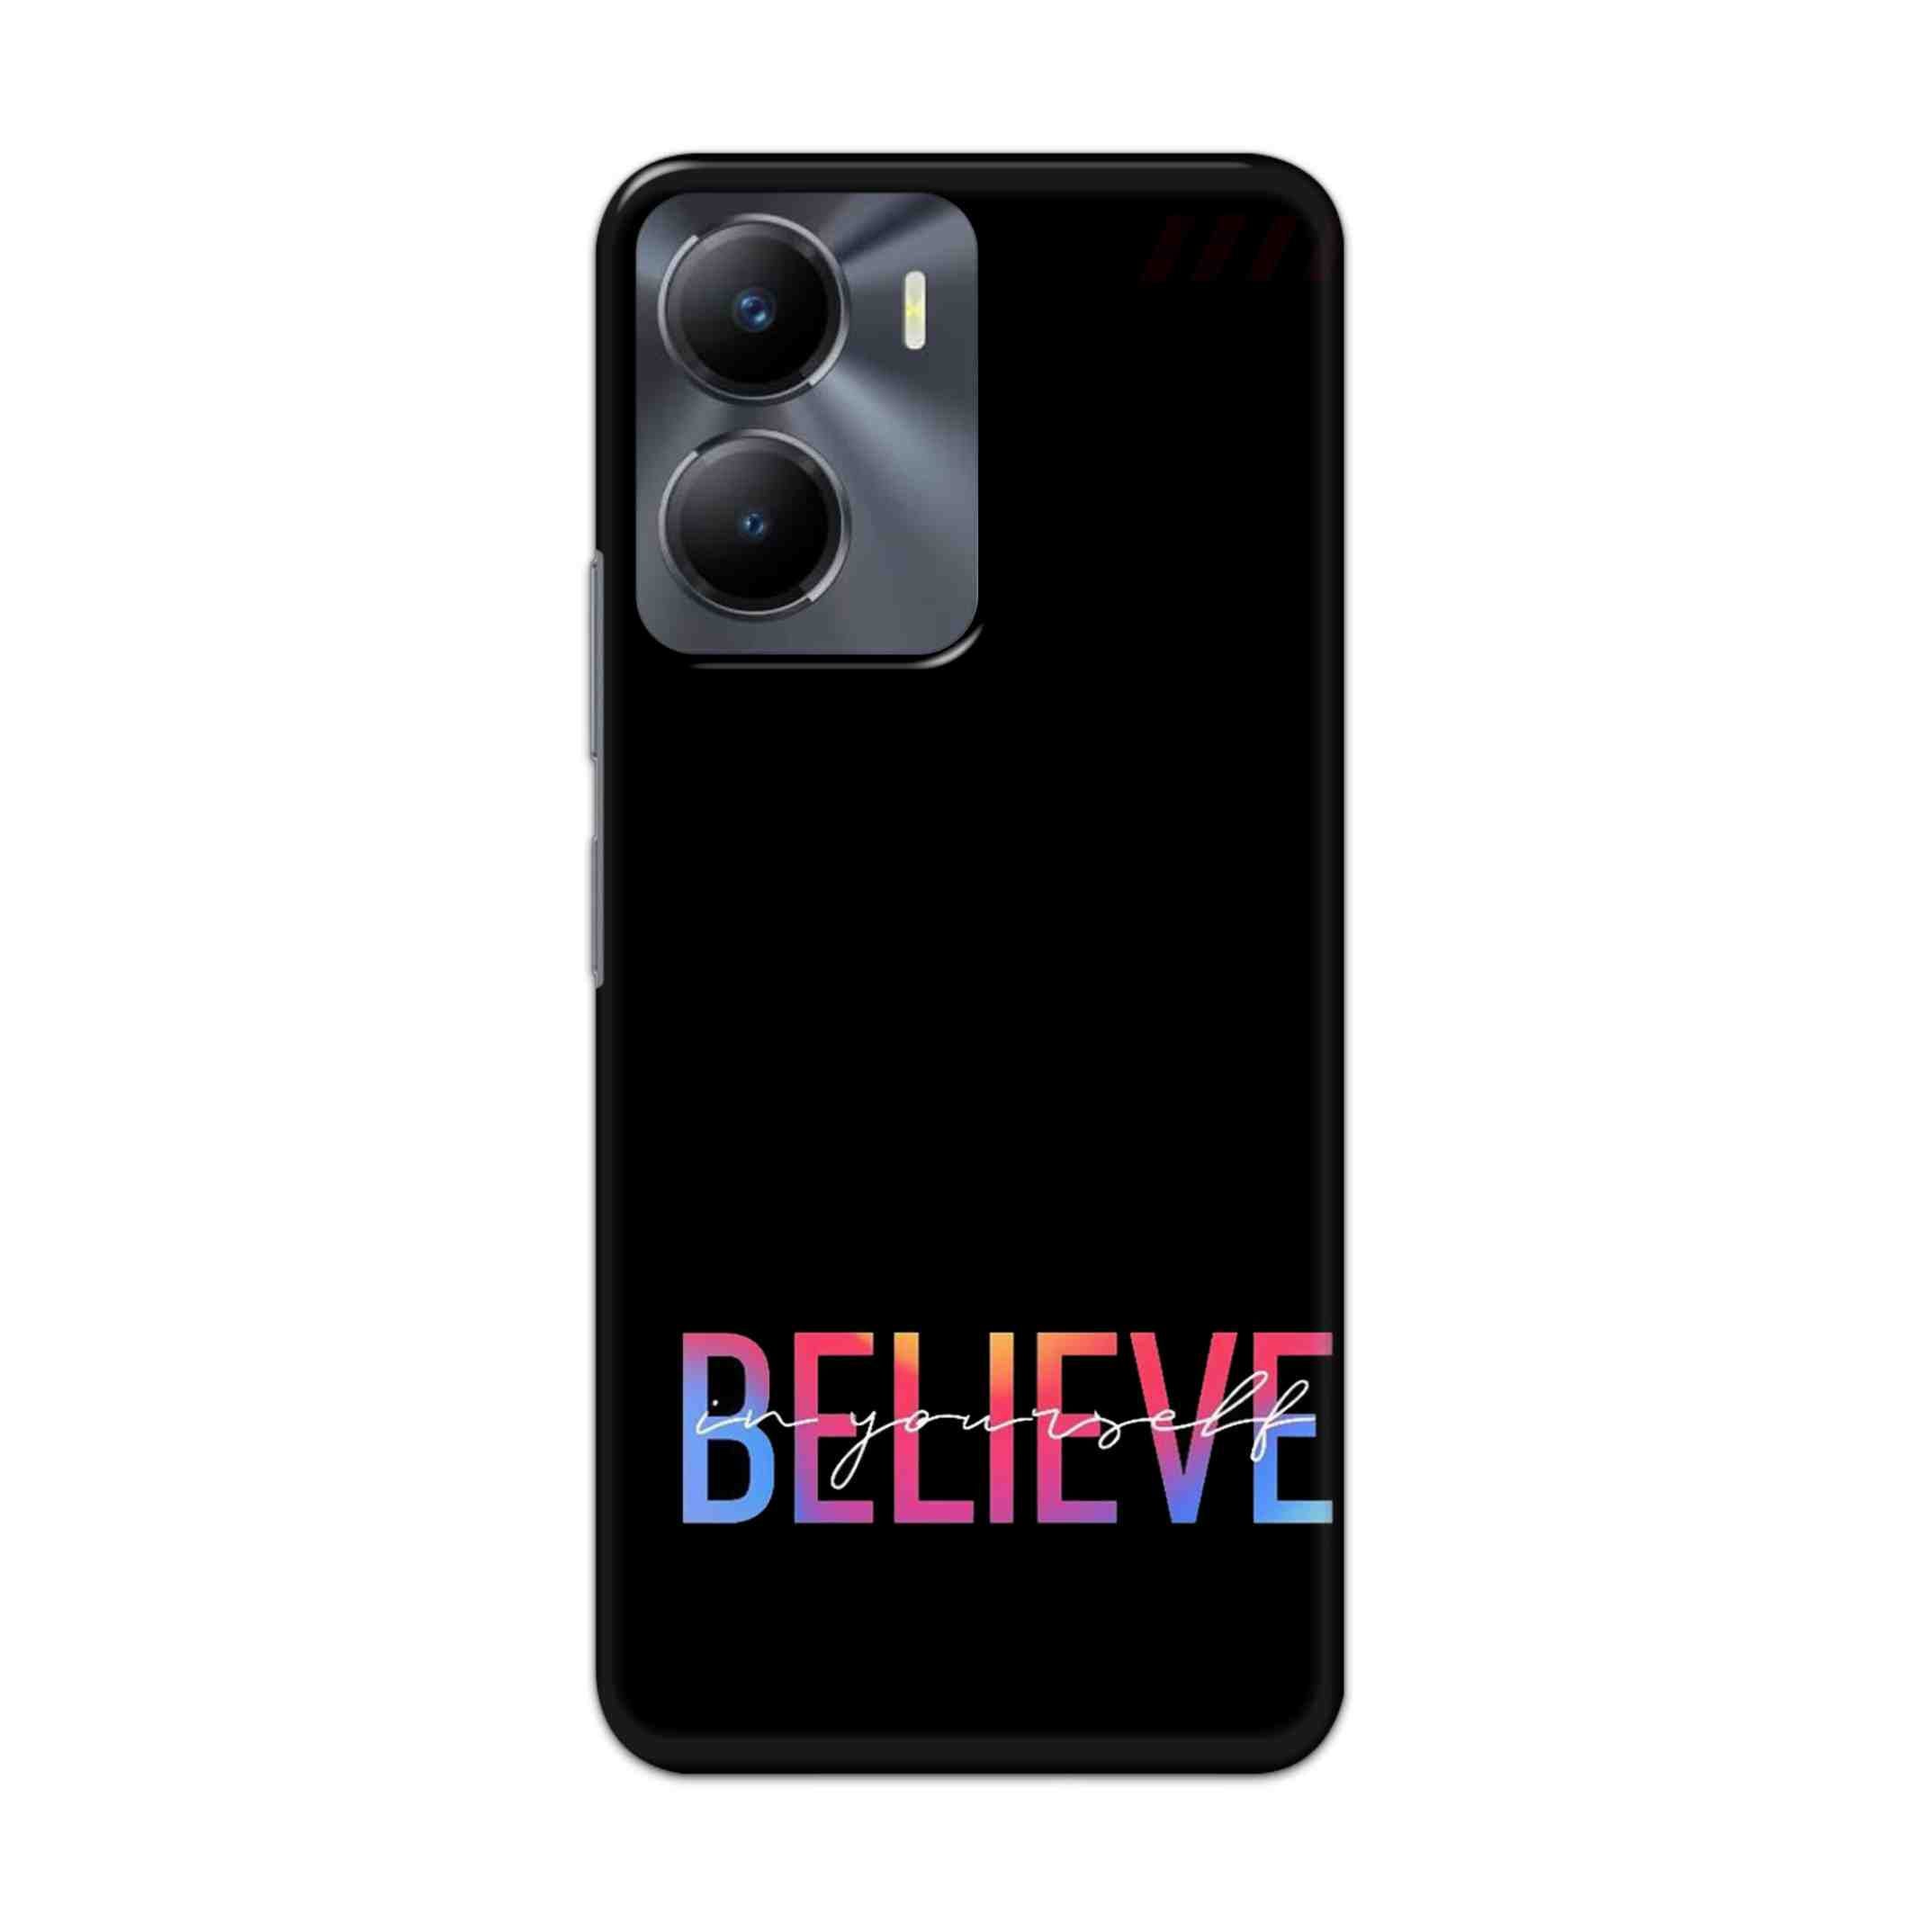 Buy Believe Hard Back Mobile Phone Case Cover For Vivo Y56 Online